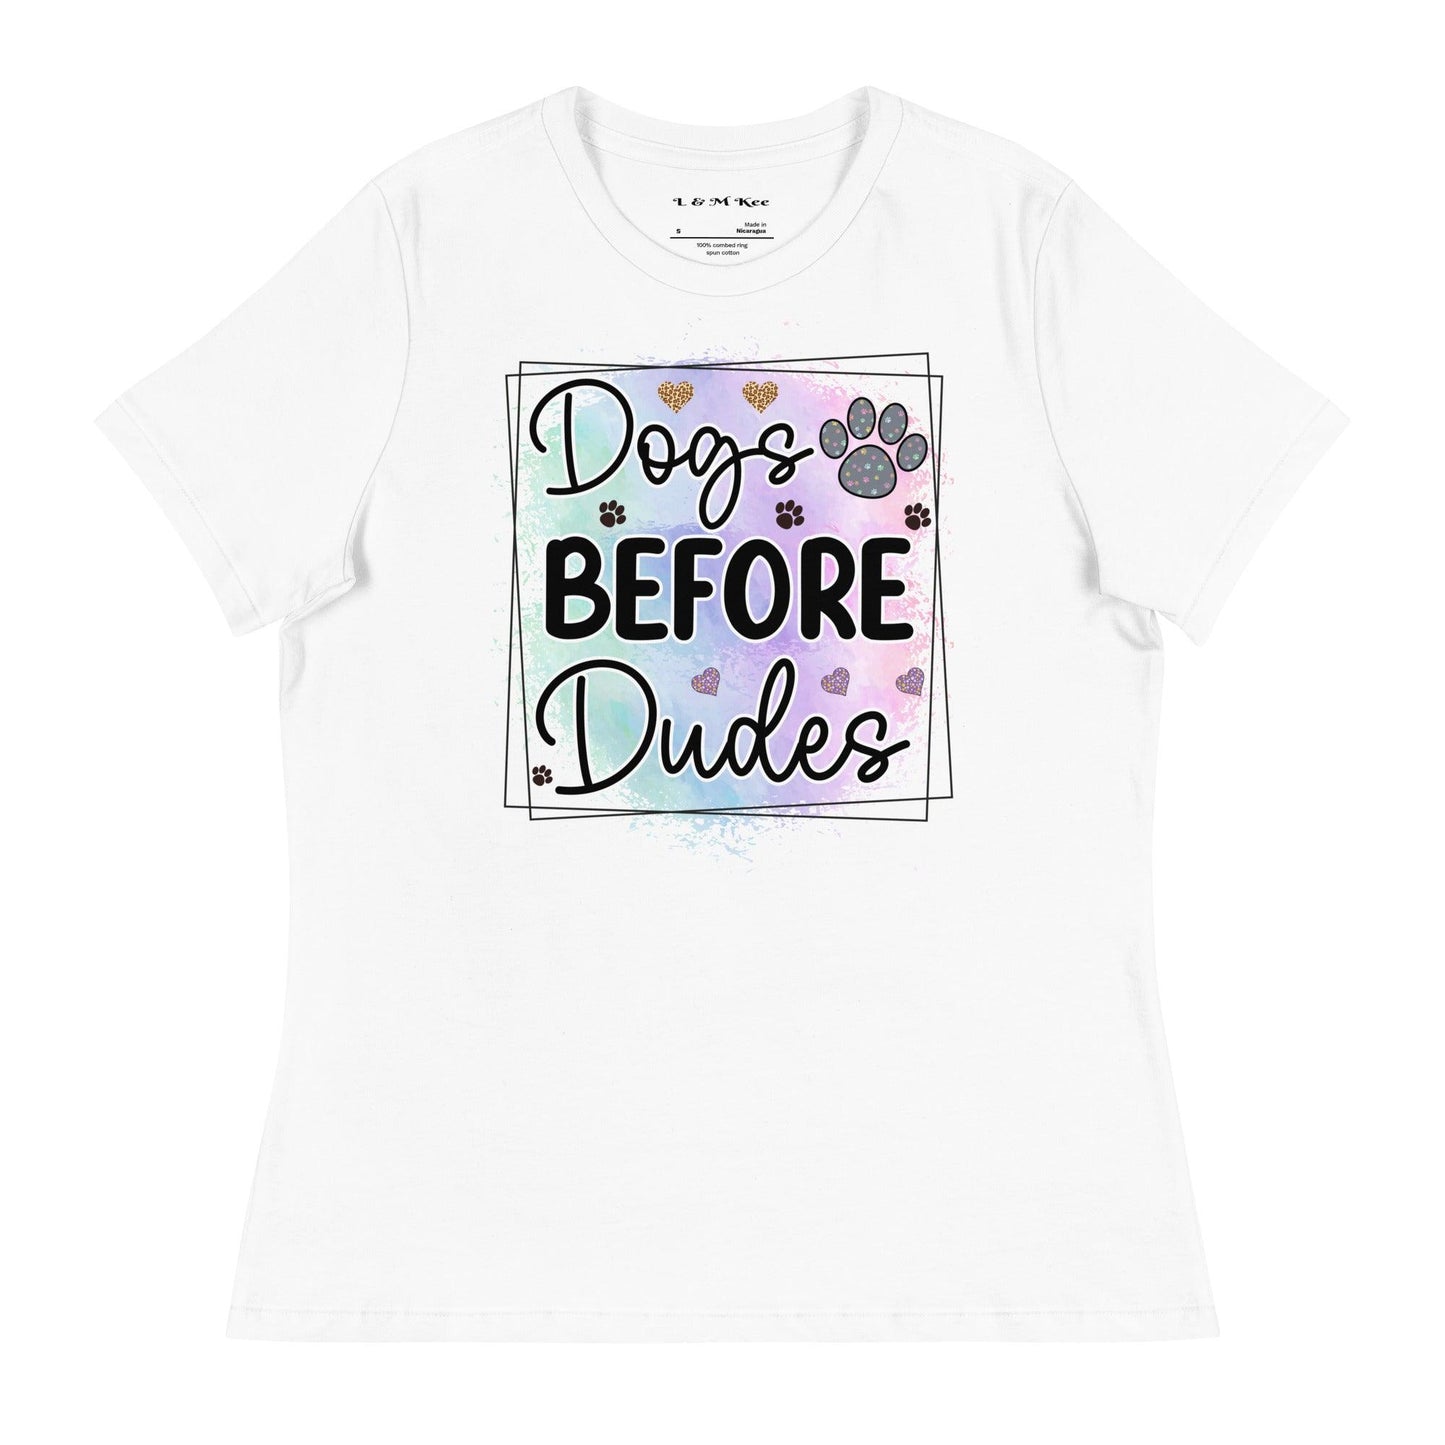 Dogs Before Dudes T-Shirt - L & M Kee, LLC